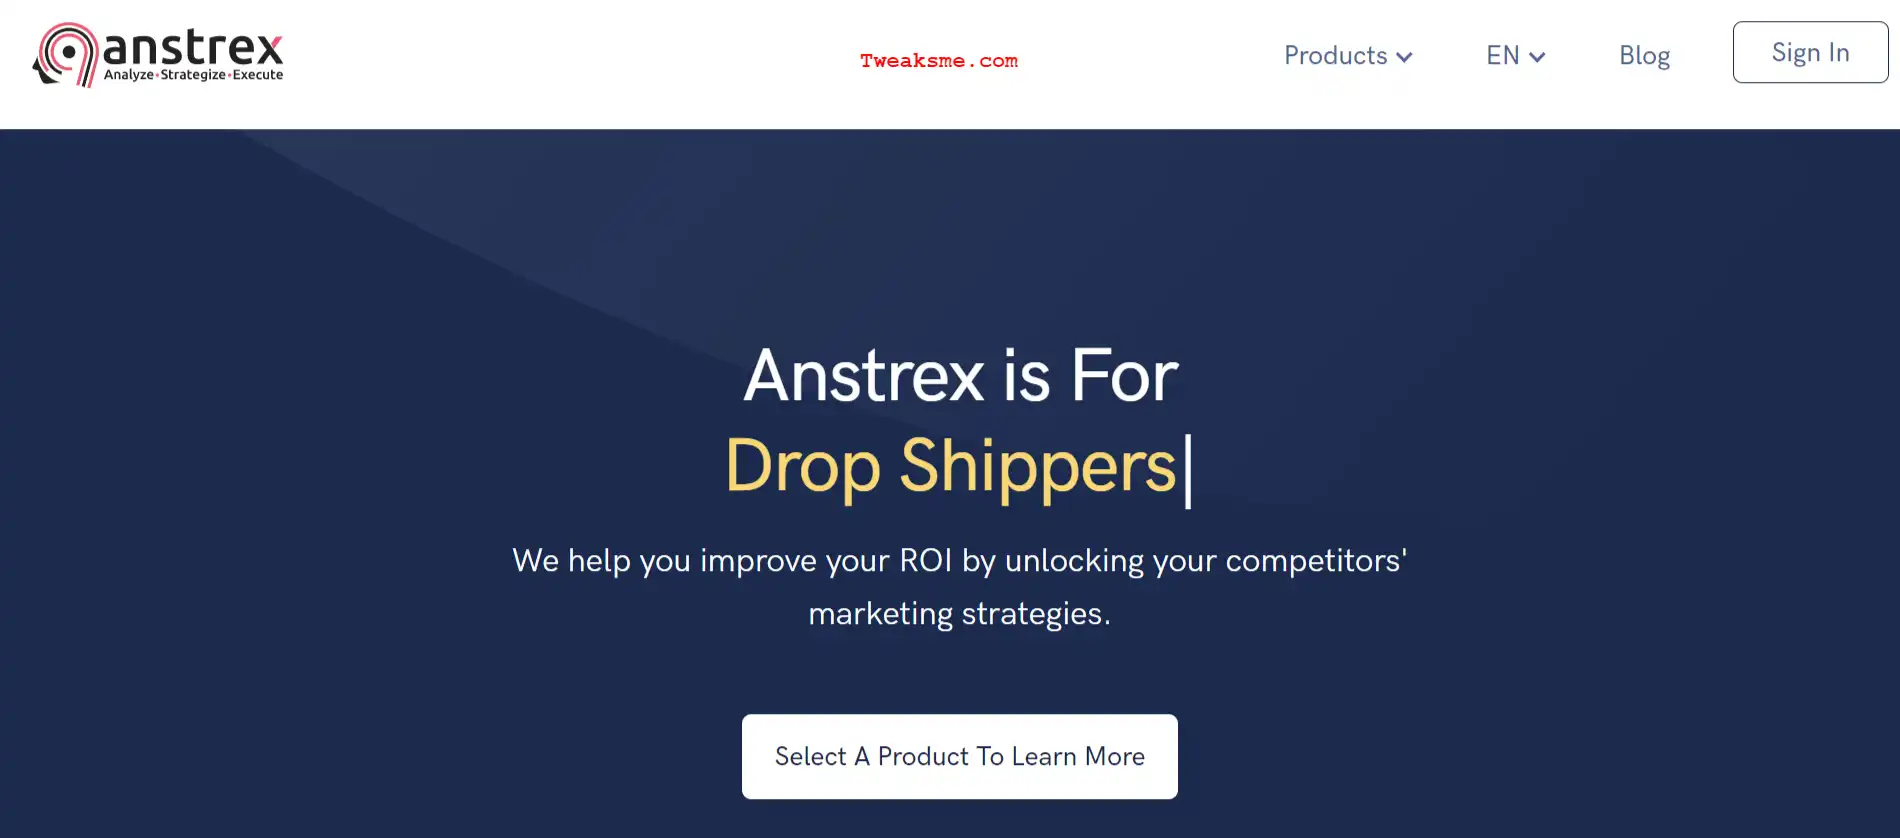 Anstrex Homepage